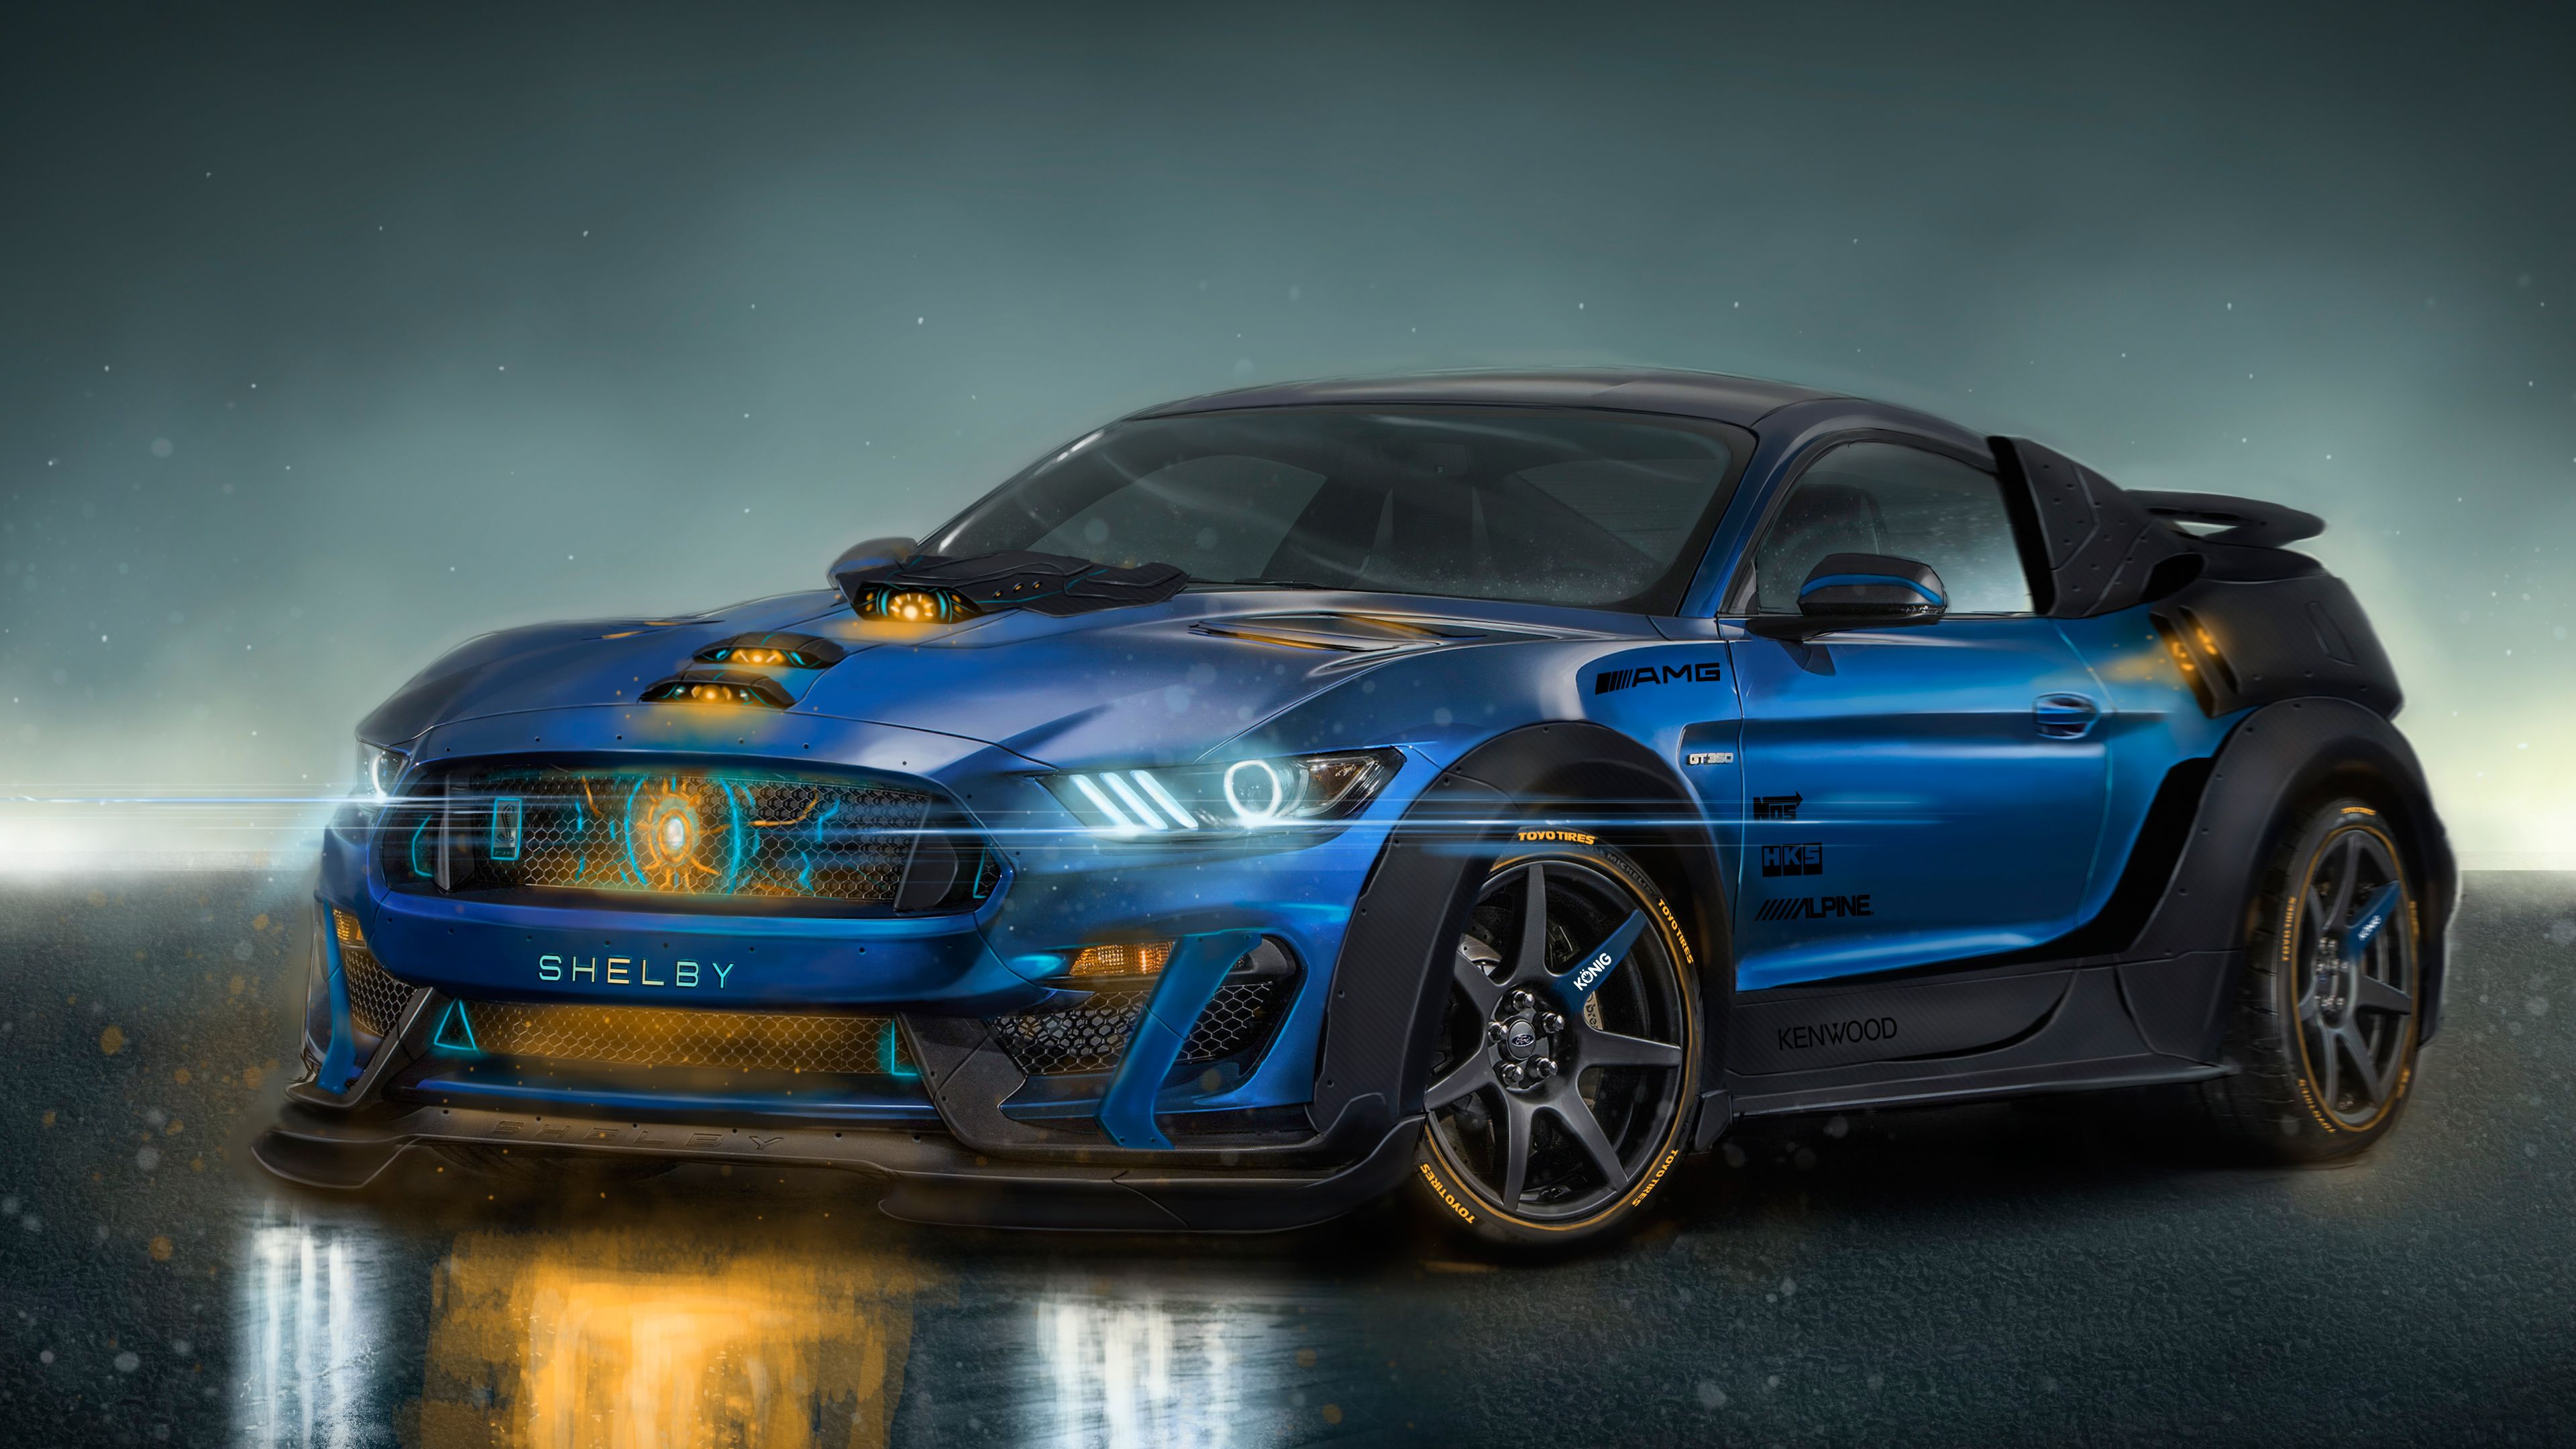 Shelby GT350R AMG Artwork Shelby Wallpaper, Hd Wallpaper, Digital Art Wallpaper, Wallpaper, Cars Wallpap. Shelby Gt350r, Car Wallpaper, Sports Car